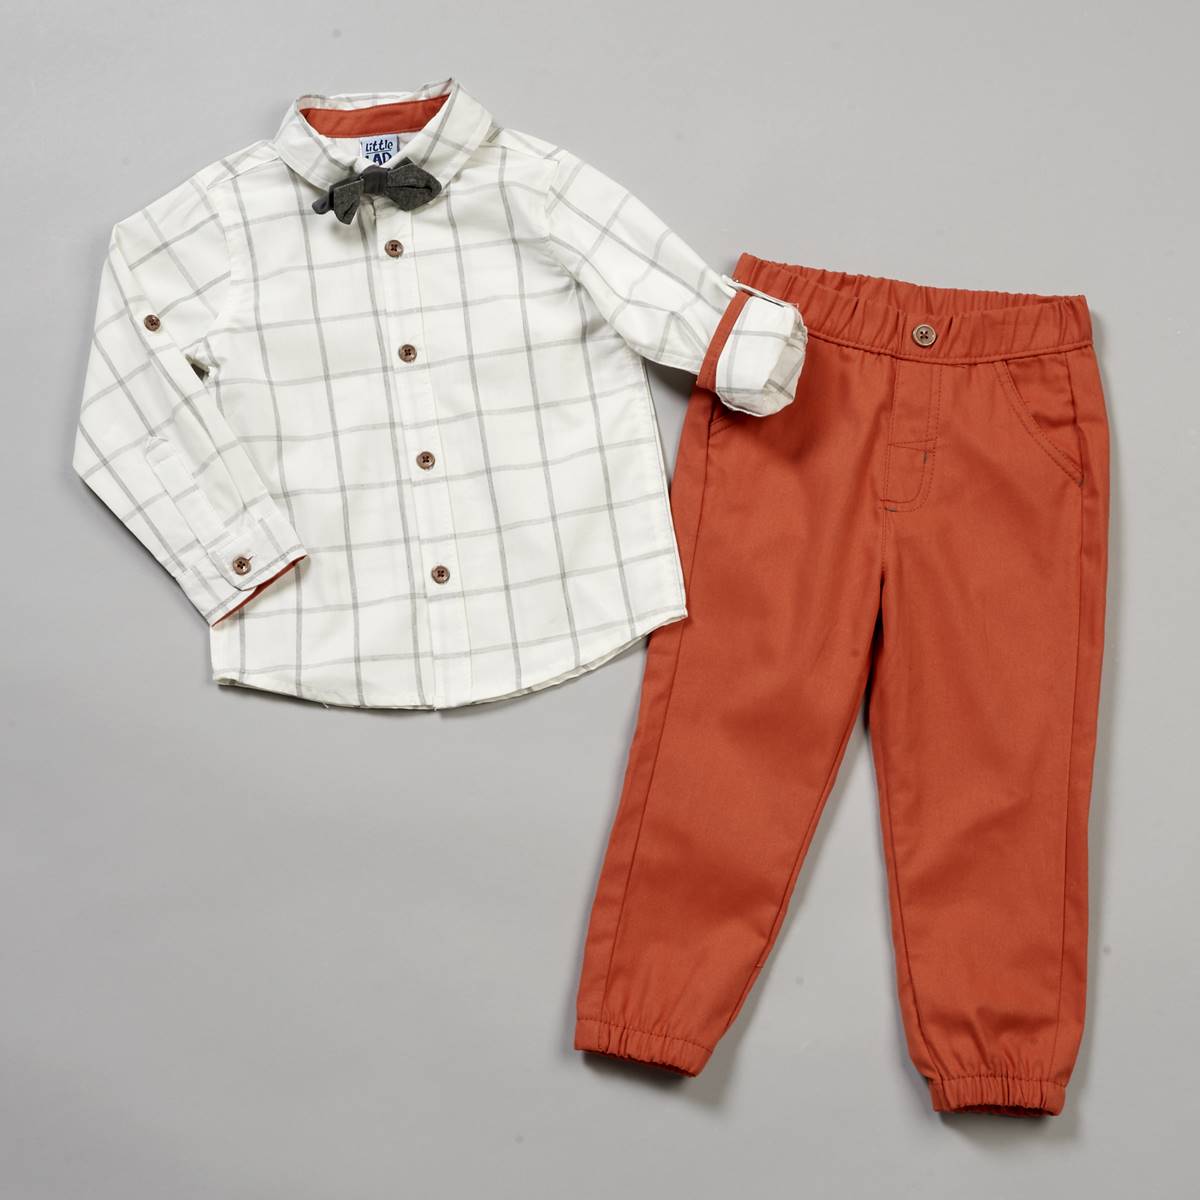 Toddler Boy Little Lad Check Top W/Bow Tie & Twill Pants Set